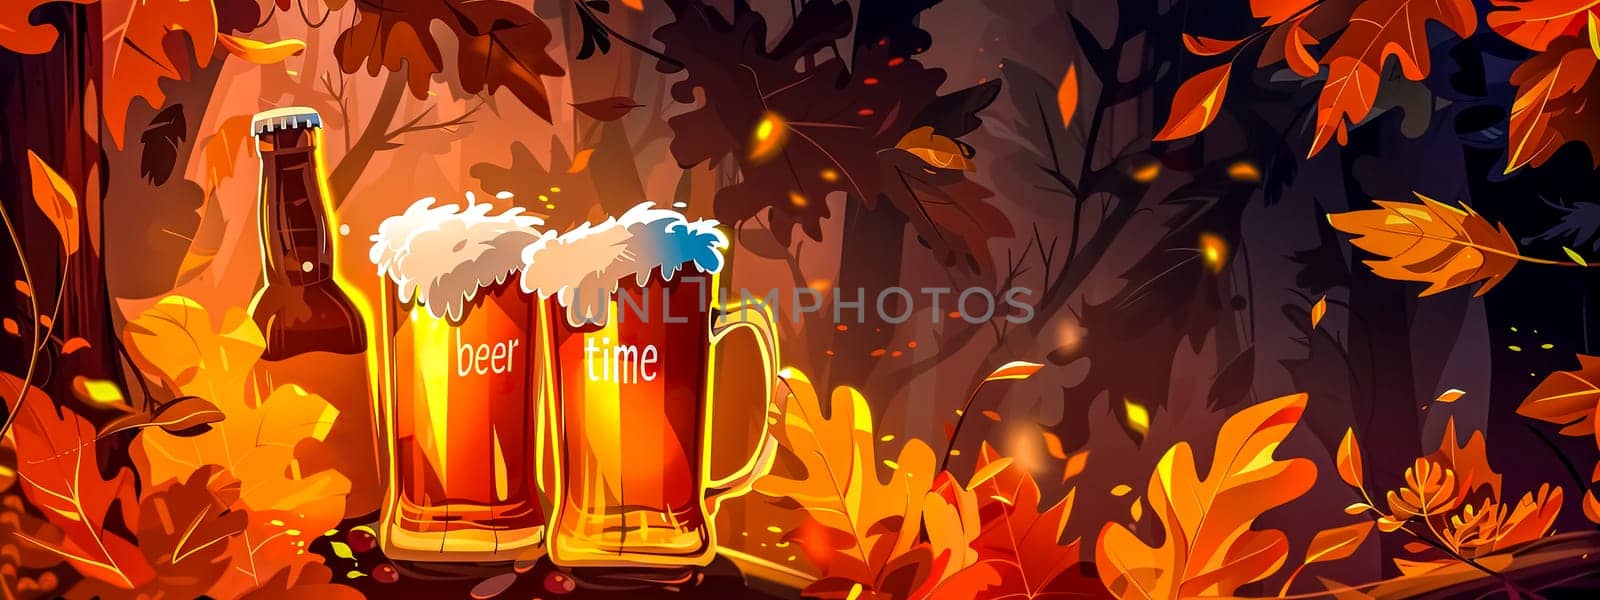 Autumn beer time - seasonal brewery concept by Edophoto